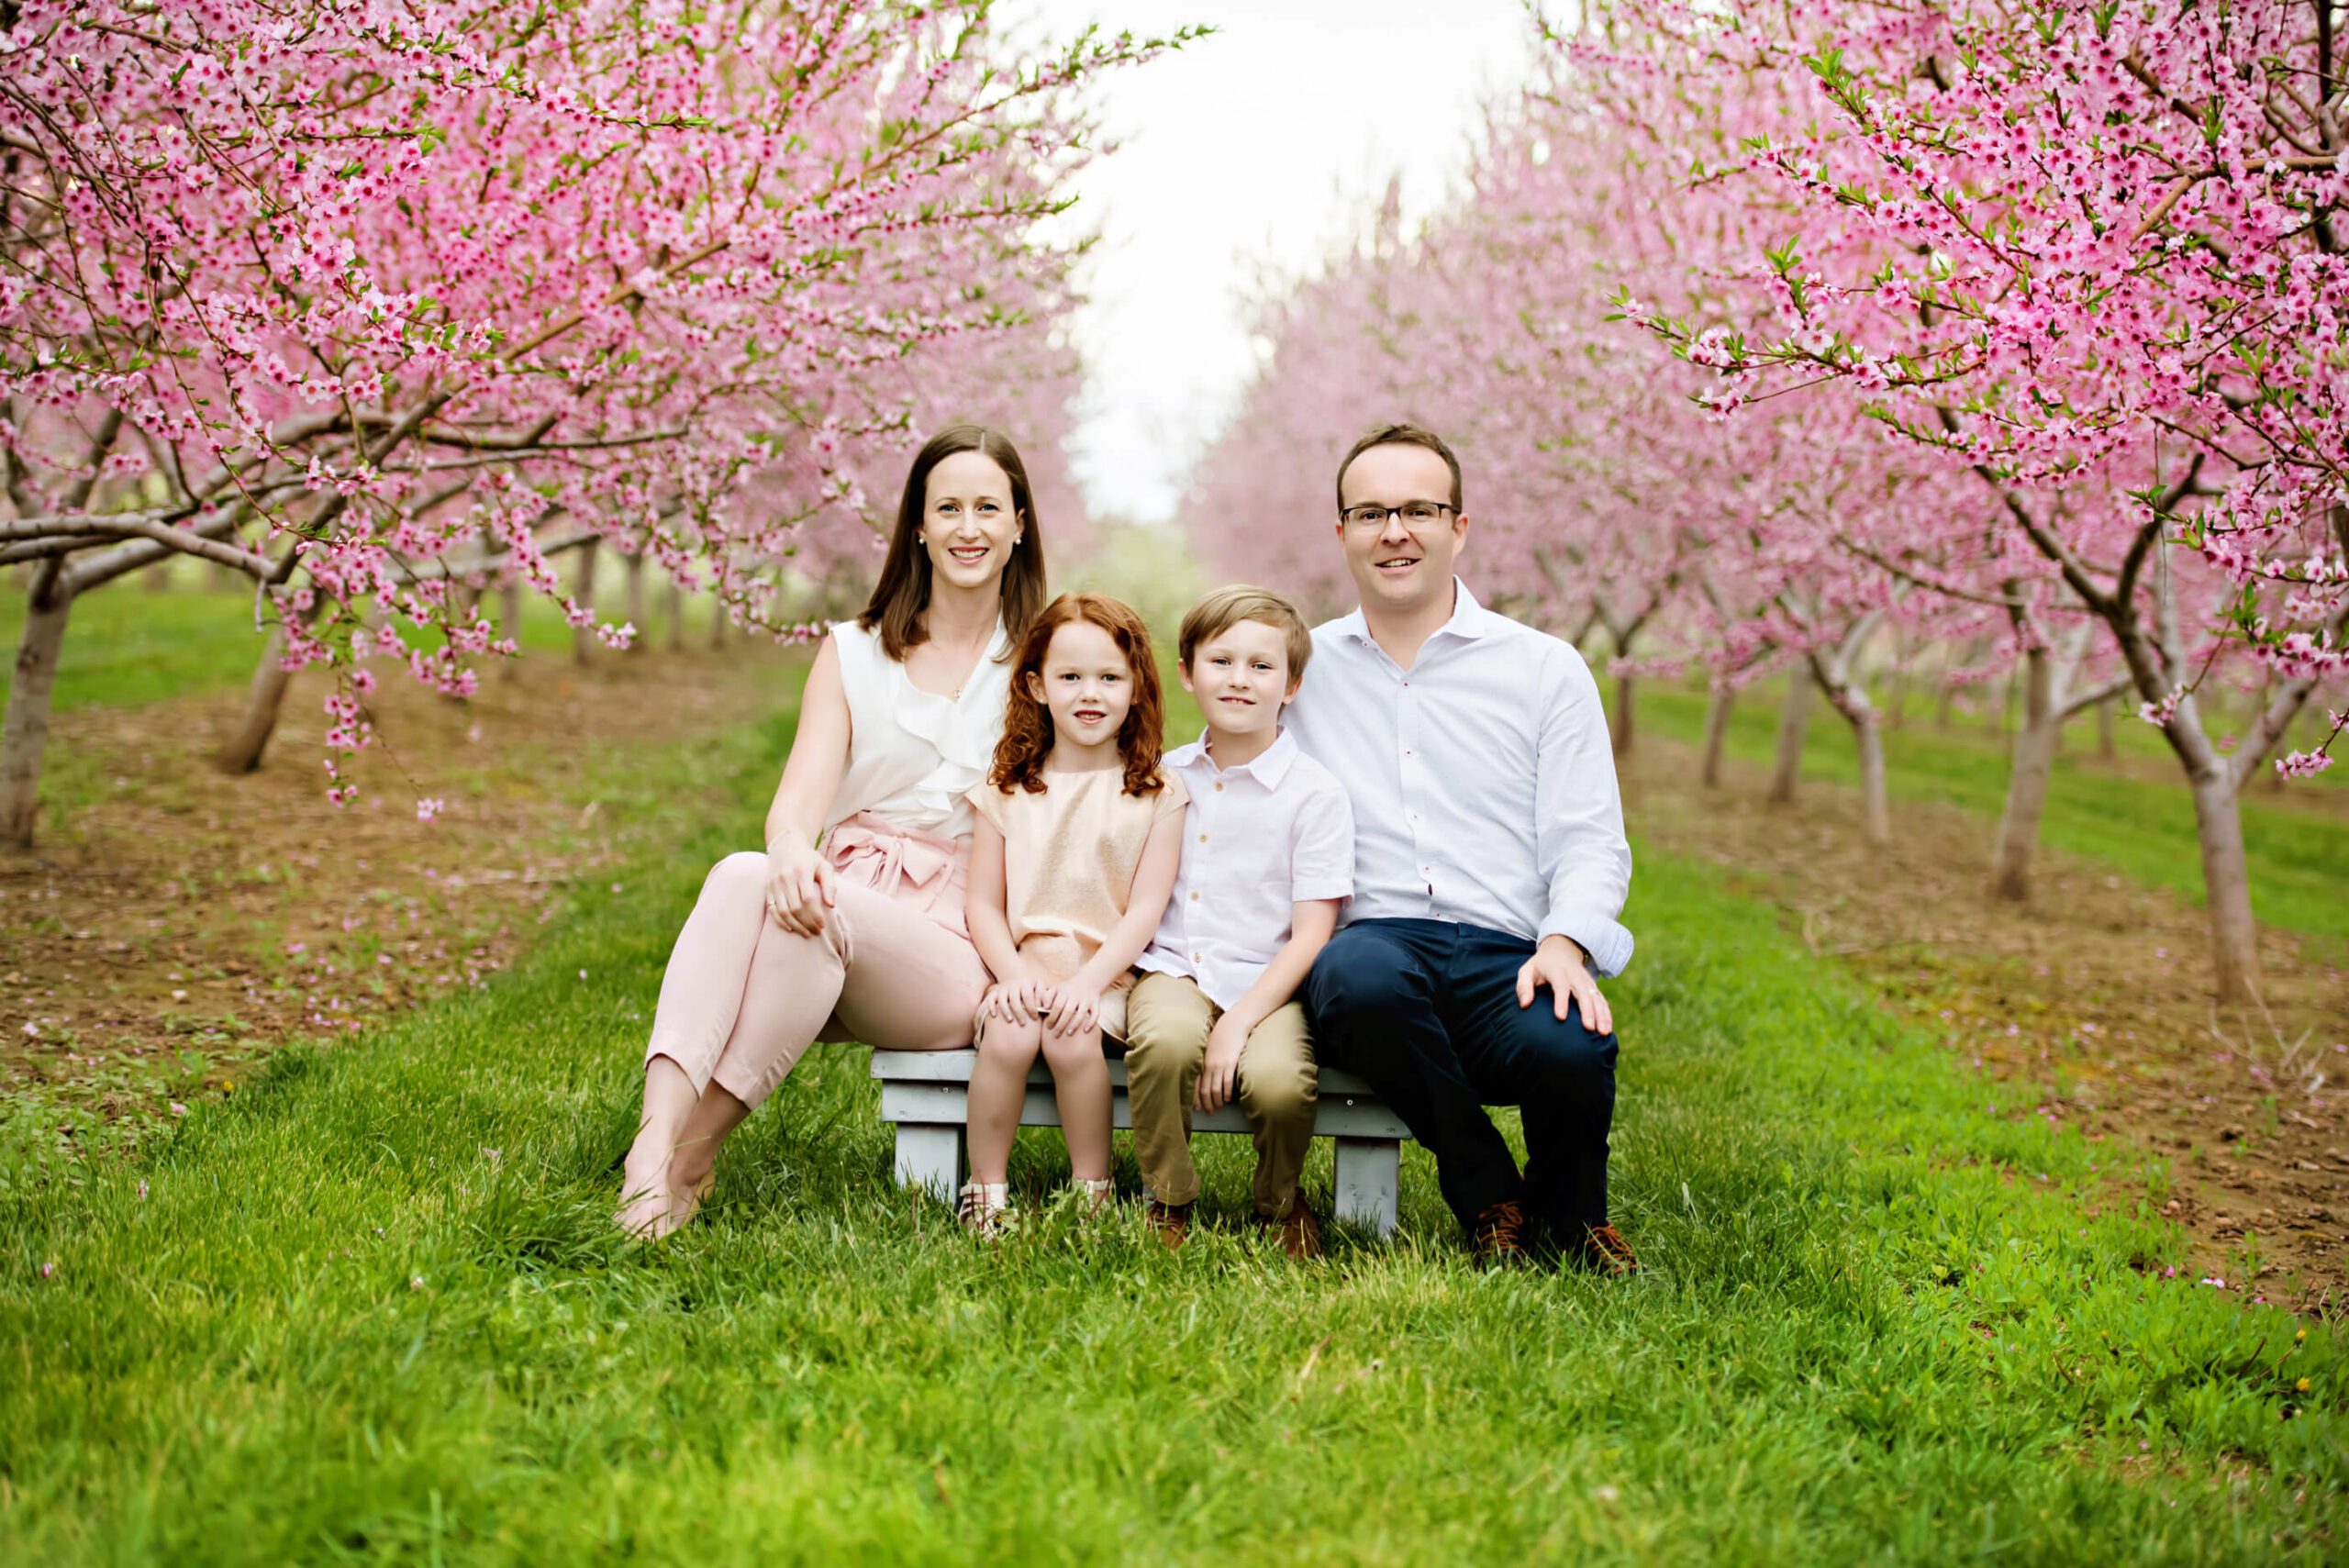 Mom, dad and brother and sister in the pink blossom orchard for their family photos sitting on a small white bench.